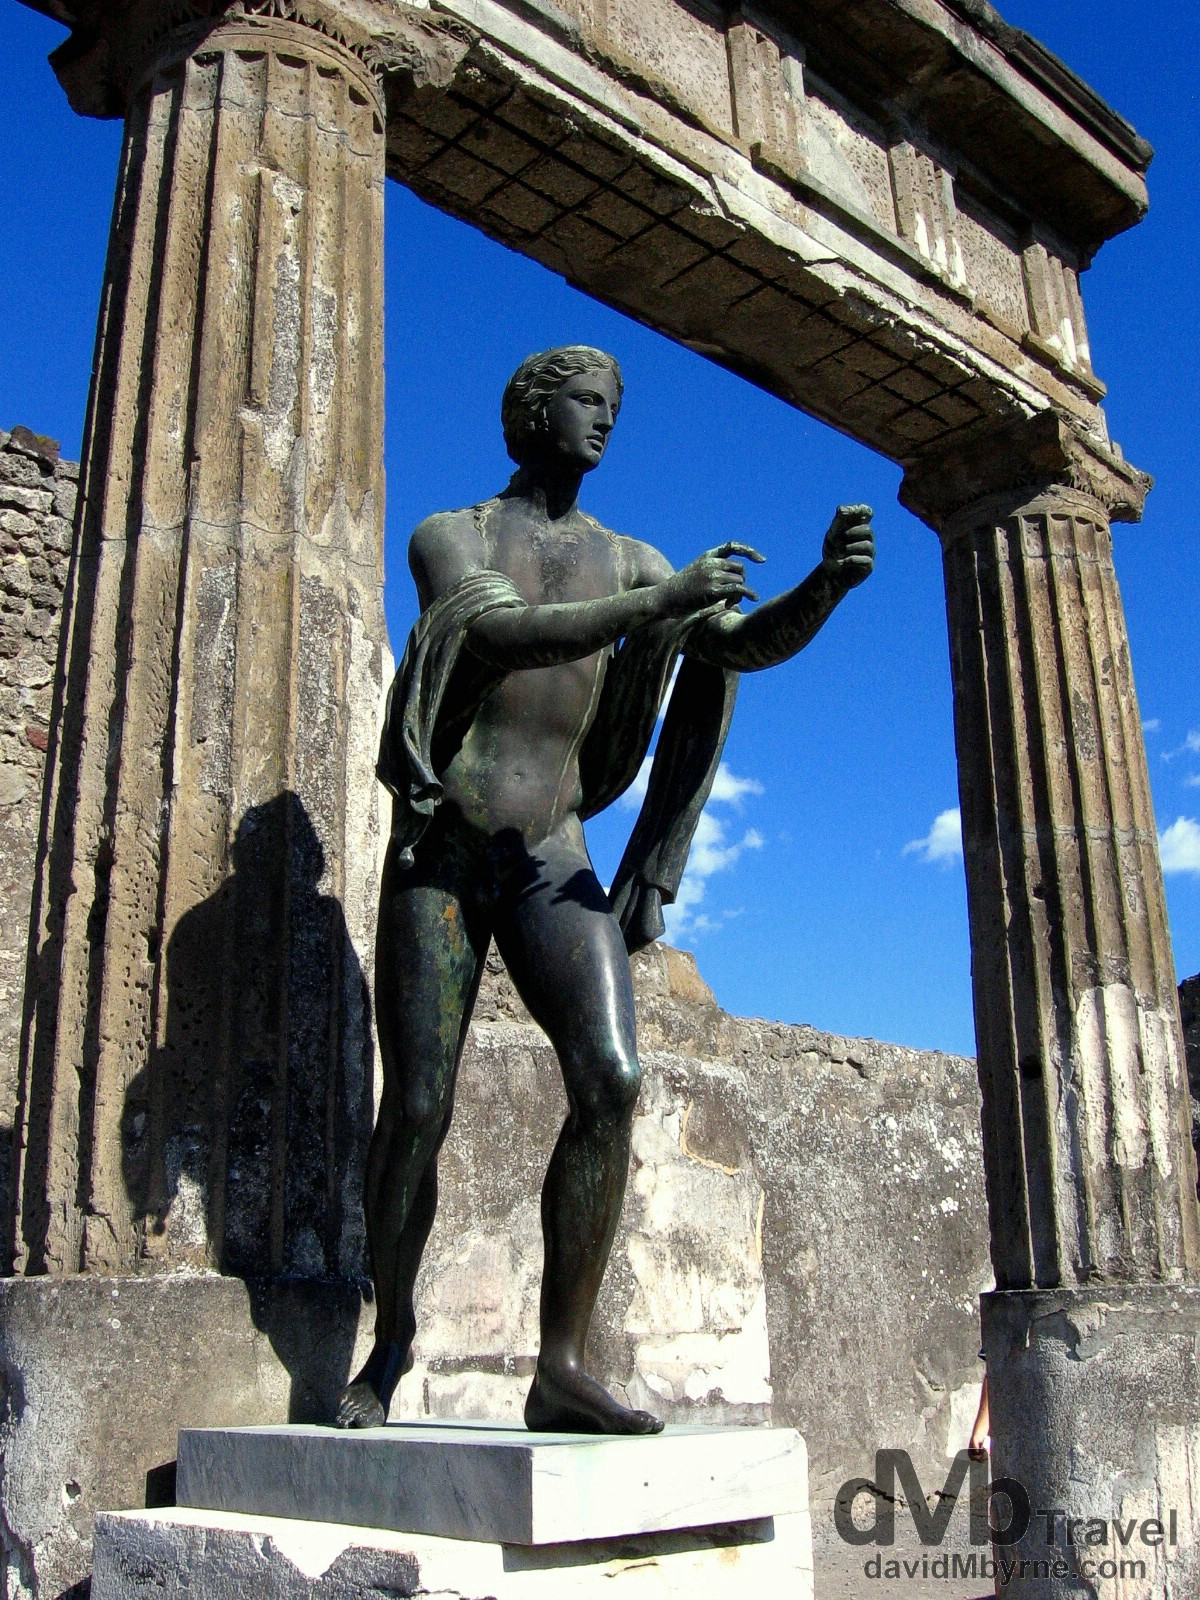 A statue of Apollo, the Greek God of light, in the Apollo Temple of the Forum in Pompeii, Campania, Italy. September 5th, 2007.